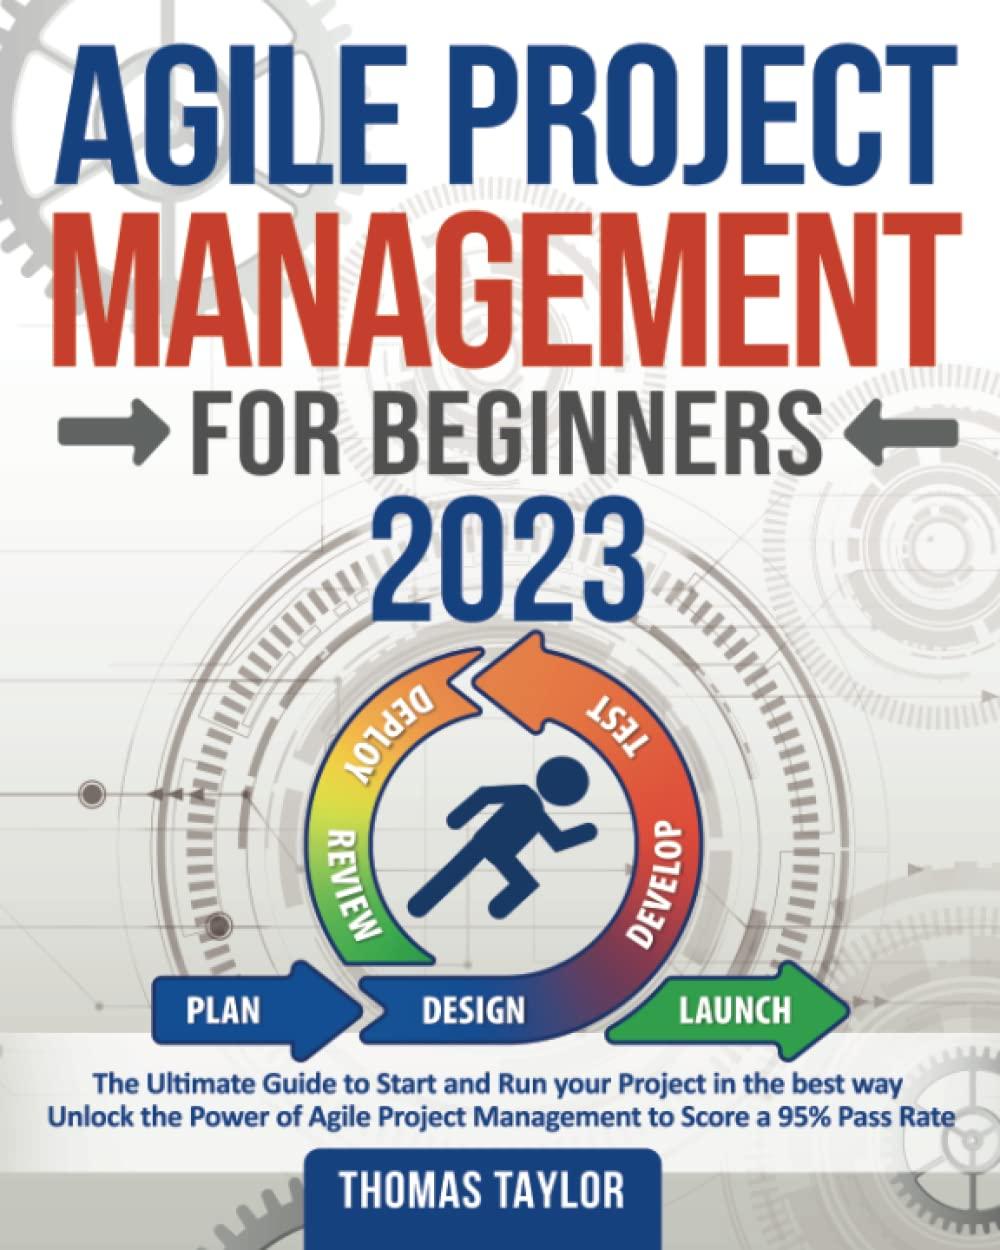 agile project management for beginners 2023 the ultimate guide to start and run your project in the best way